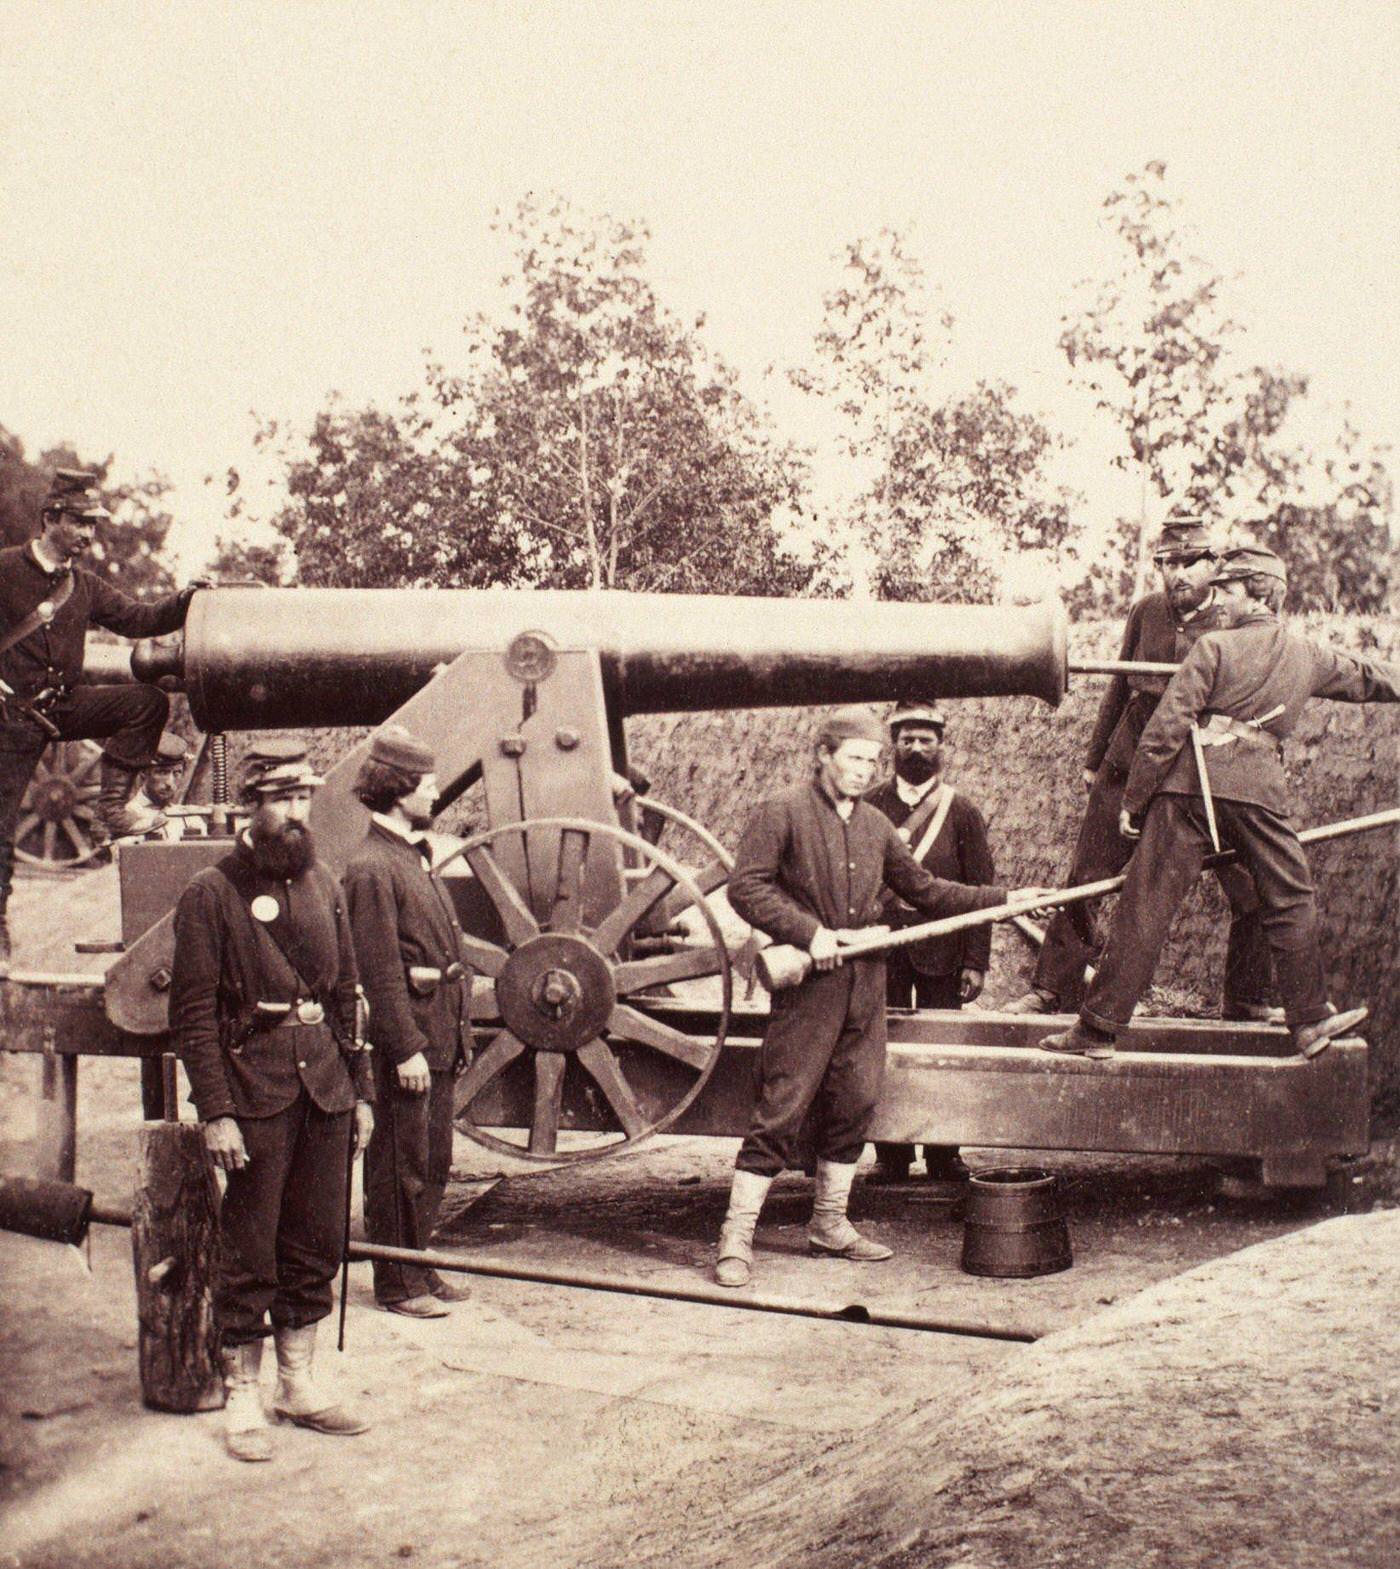 Union gunners pose around a 32-pounder seacoast gun mounted at one of the many forts that protected Washington, D.C., 1860s